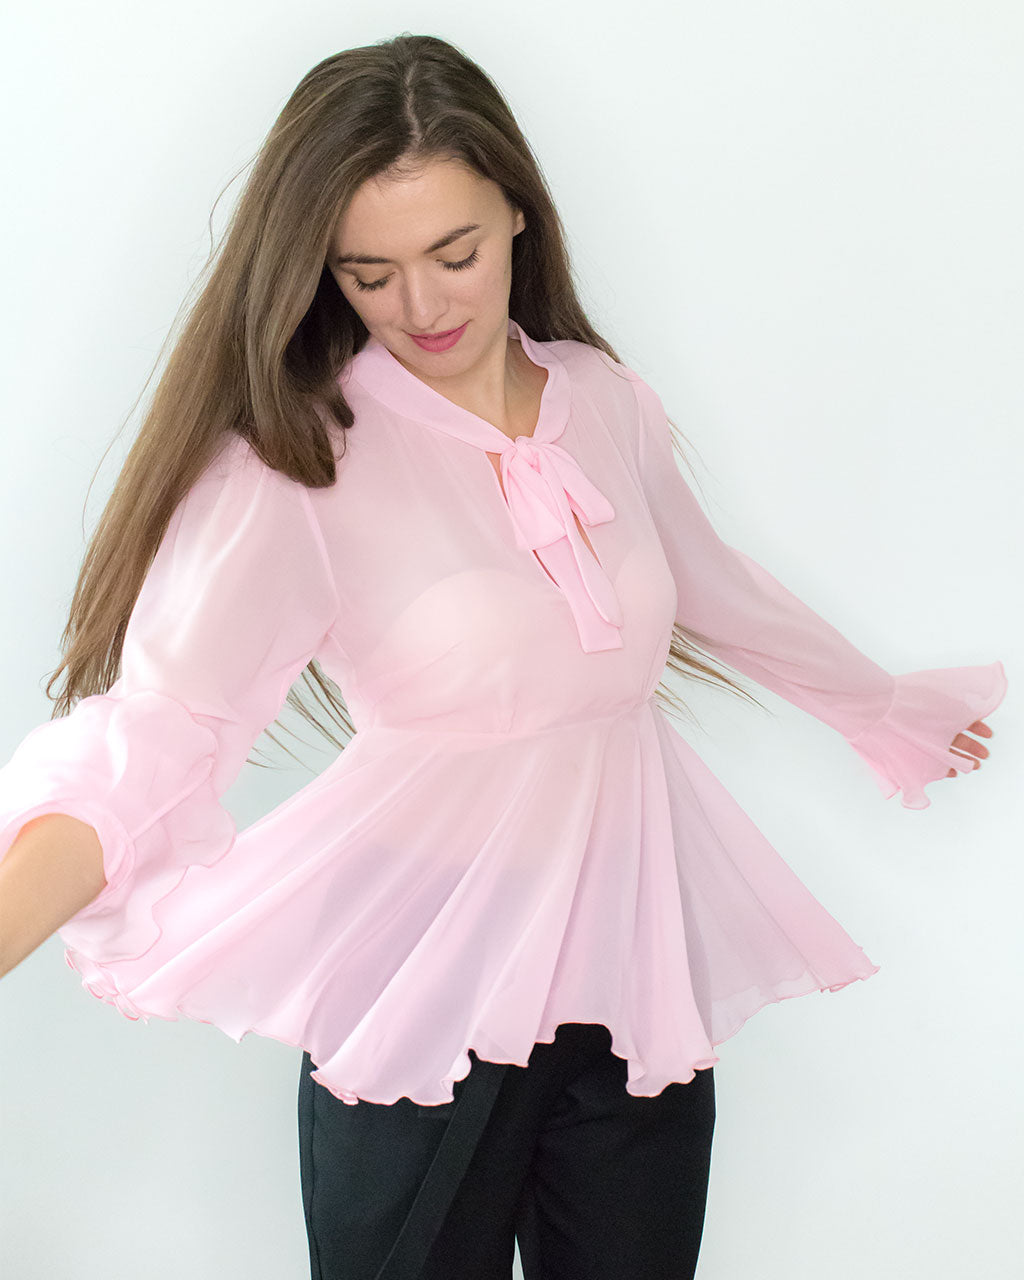 https://adkn.co.uk/cdn/shop/products/Sustainable-Recycled-Pink-Chiffon-Peplum-Blouse-ADKN-01.jpg?v=1603996577